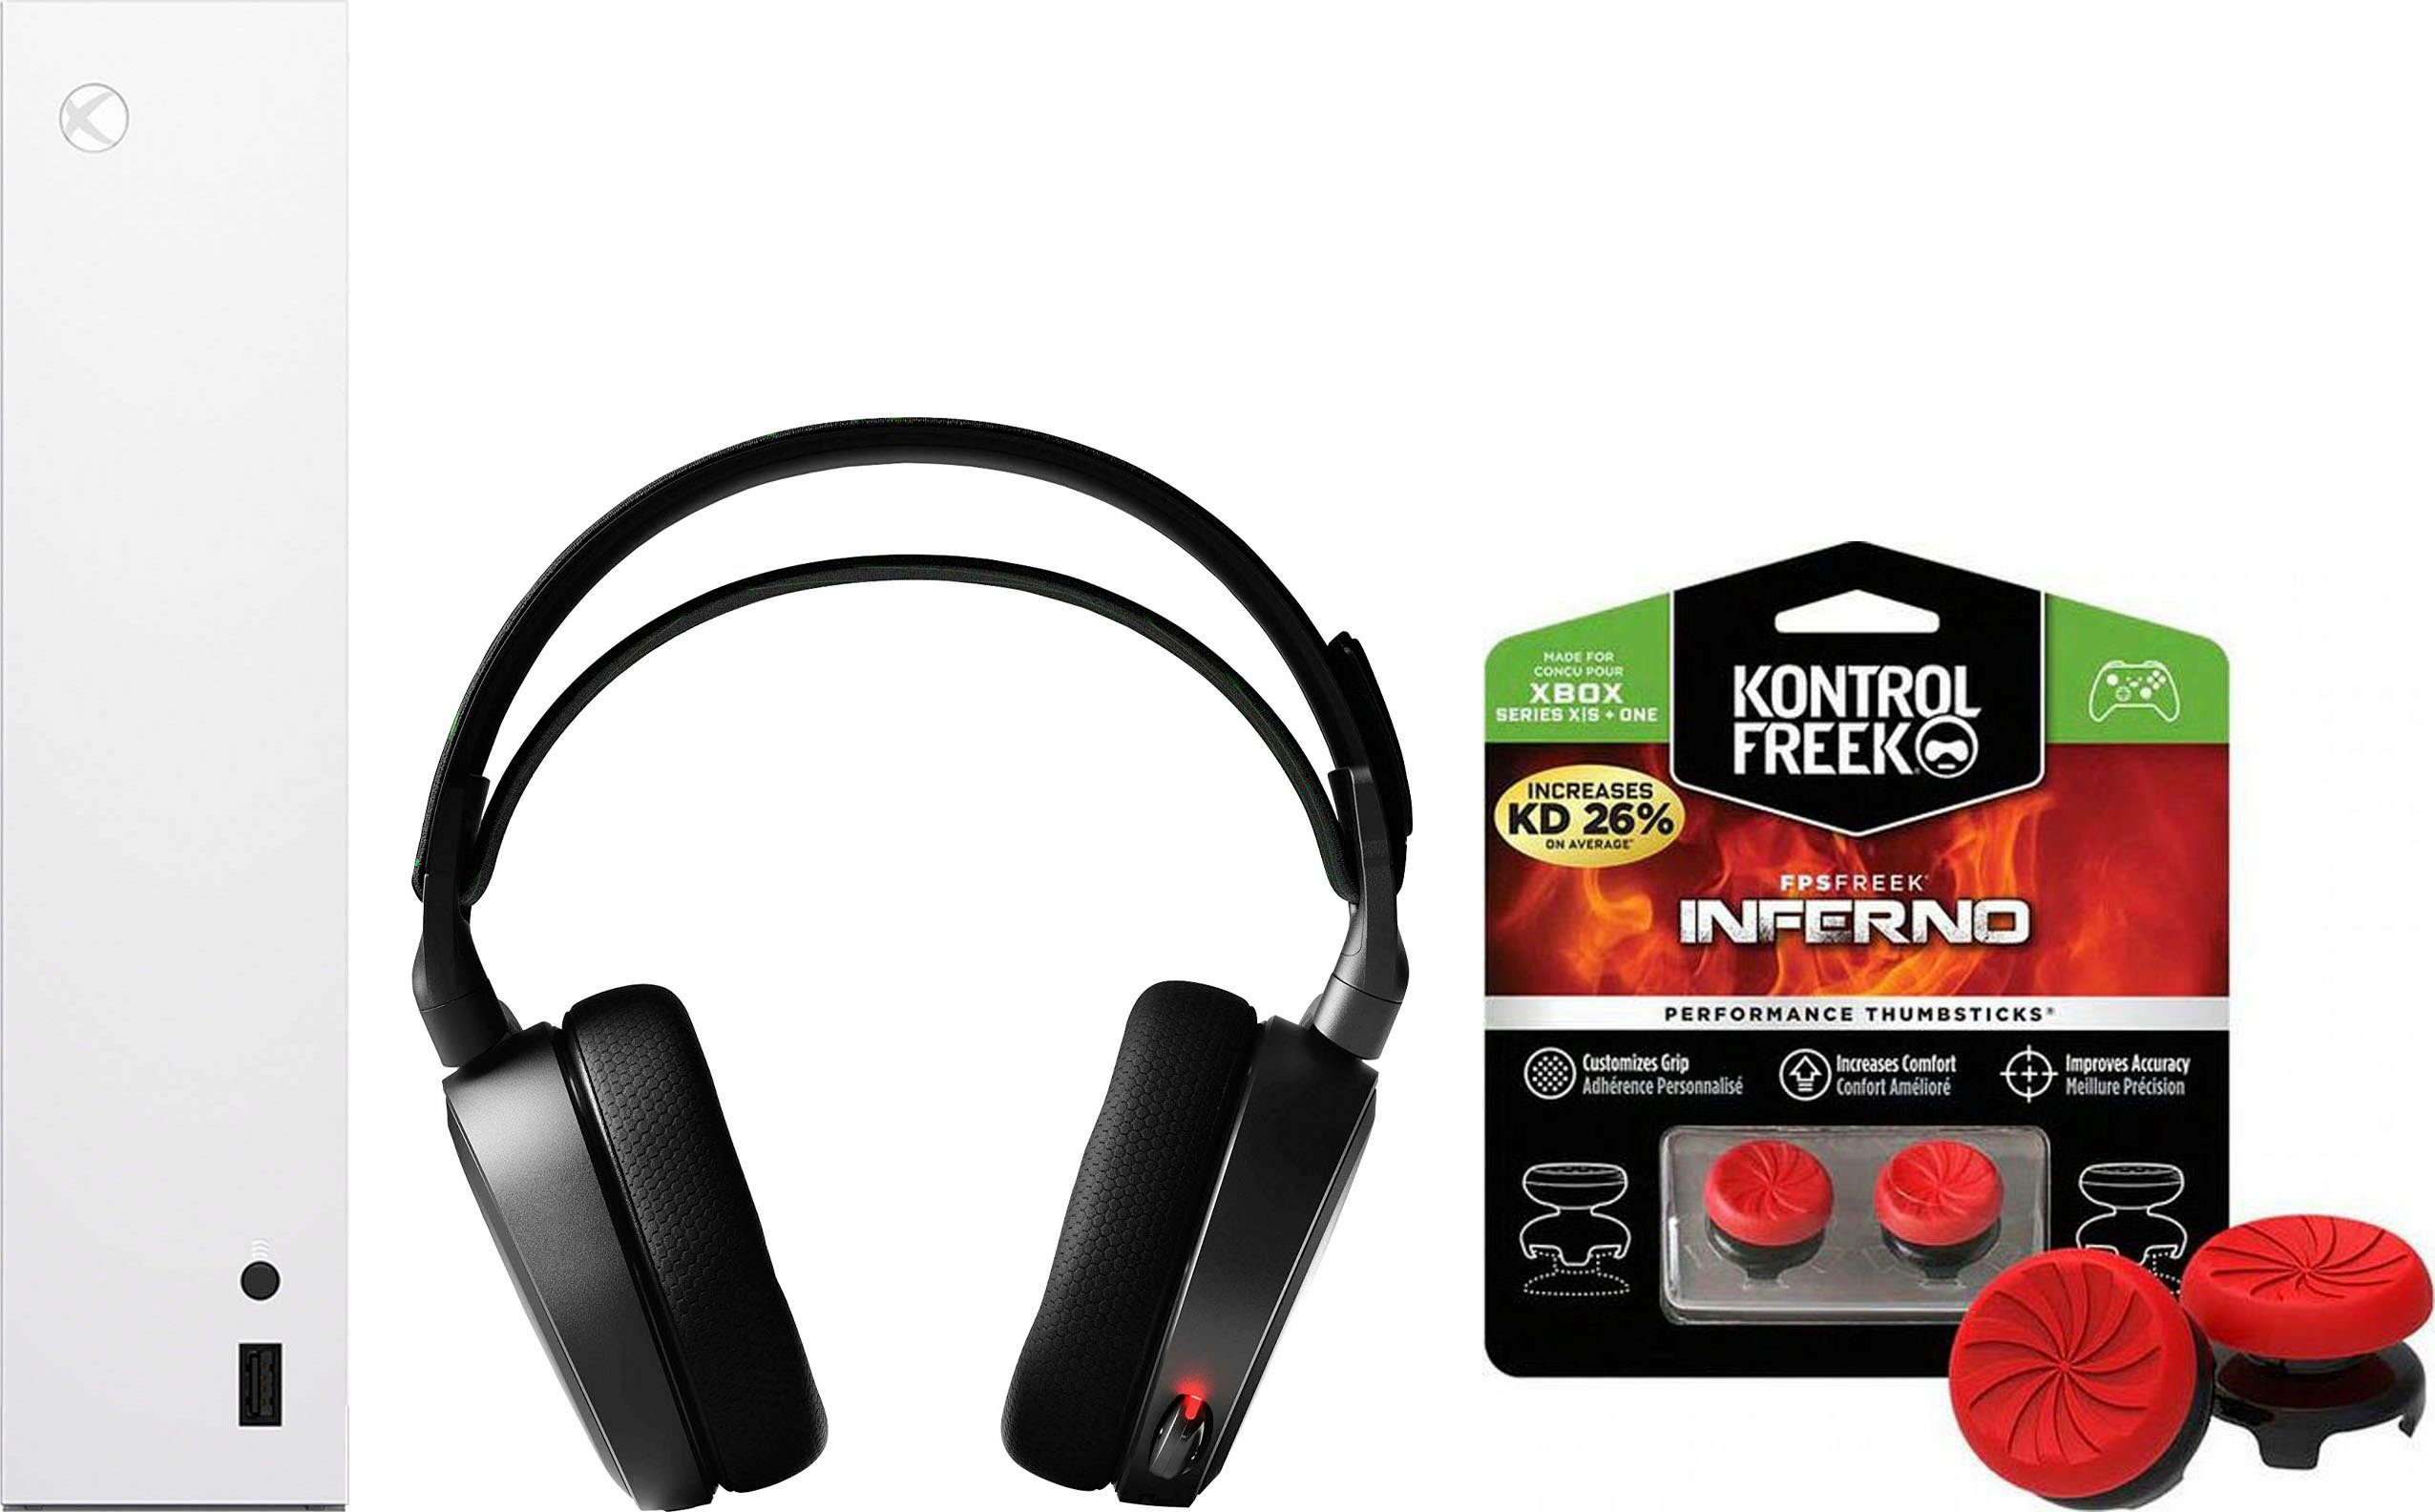 True SteelSeries (Noise-Cancelling, Wireless, 9X Arctis Gaming-Headset Bluetooth)